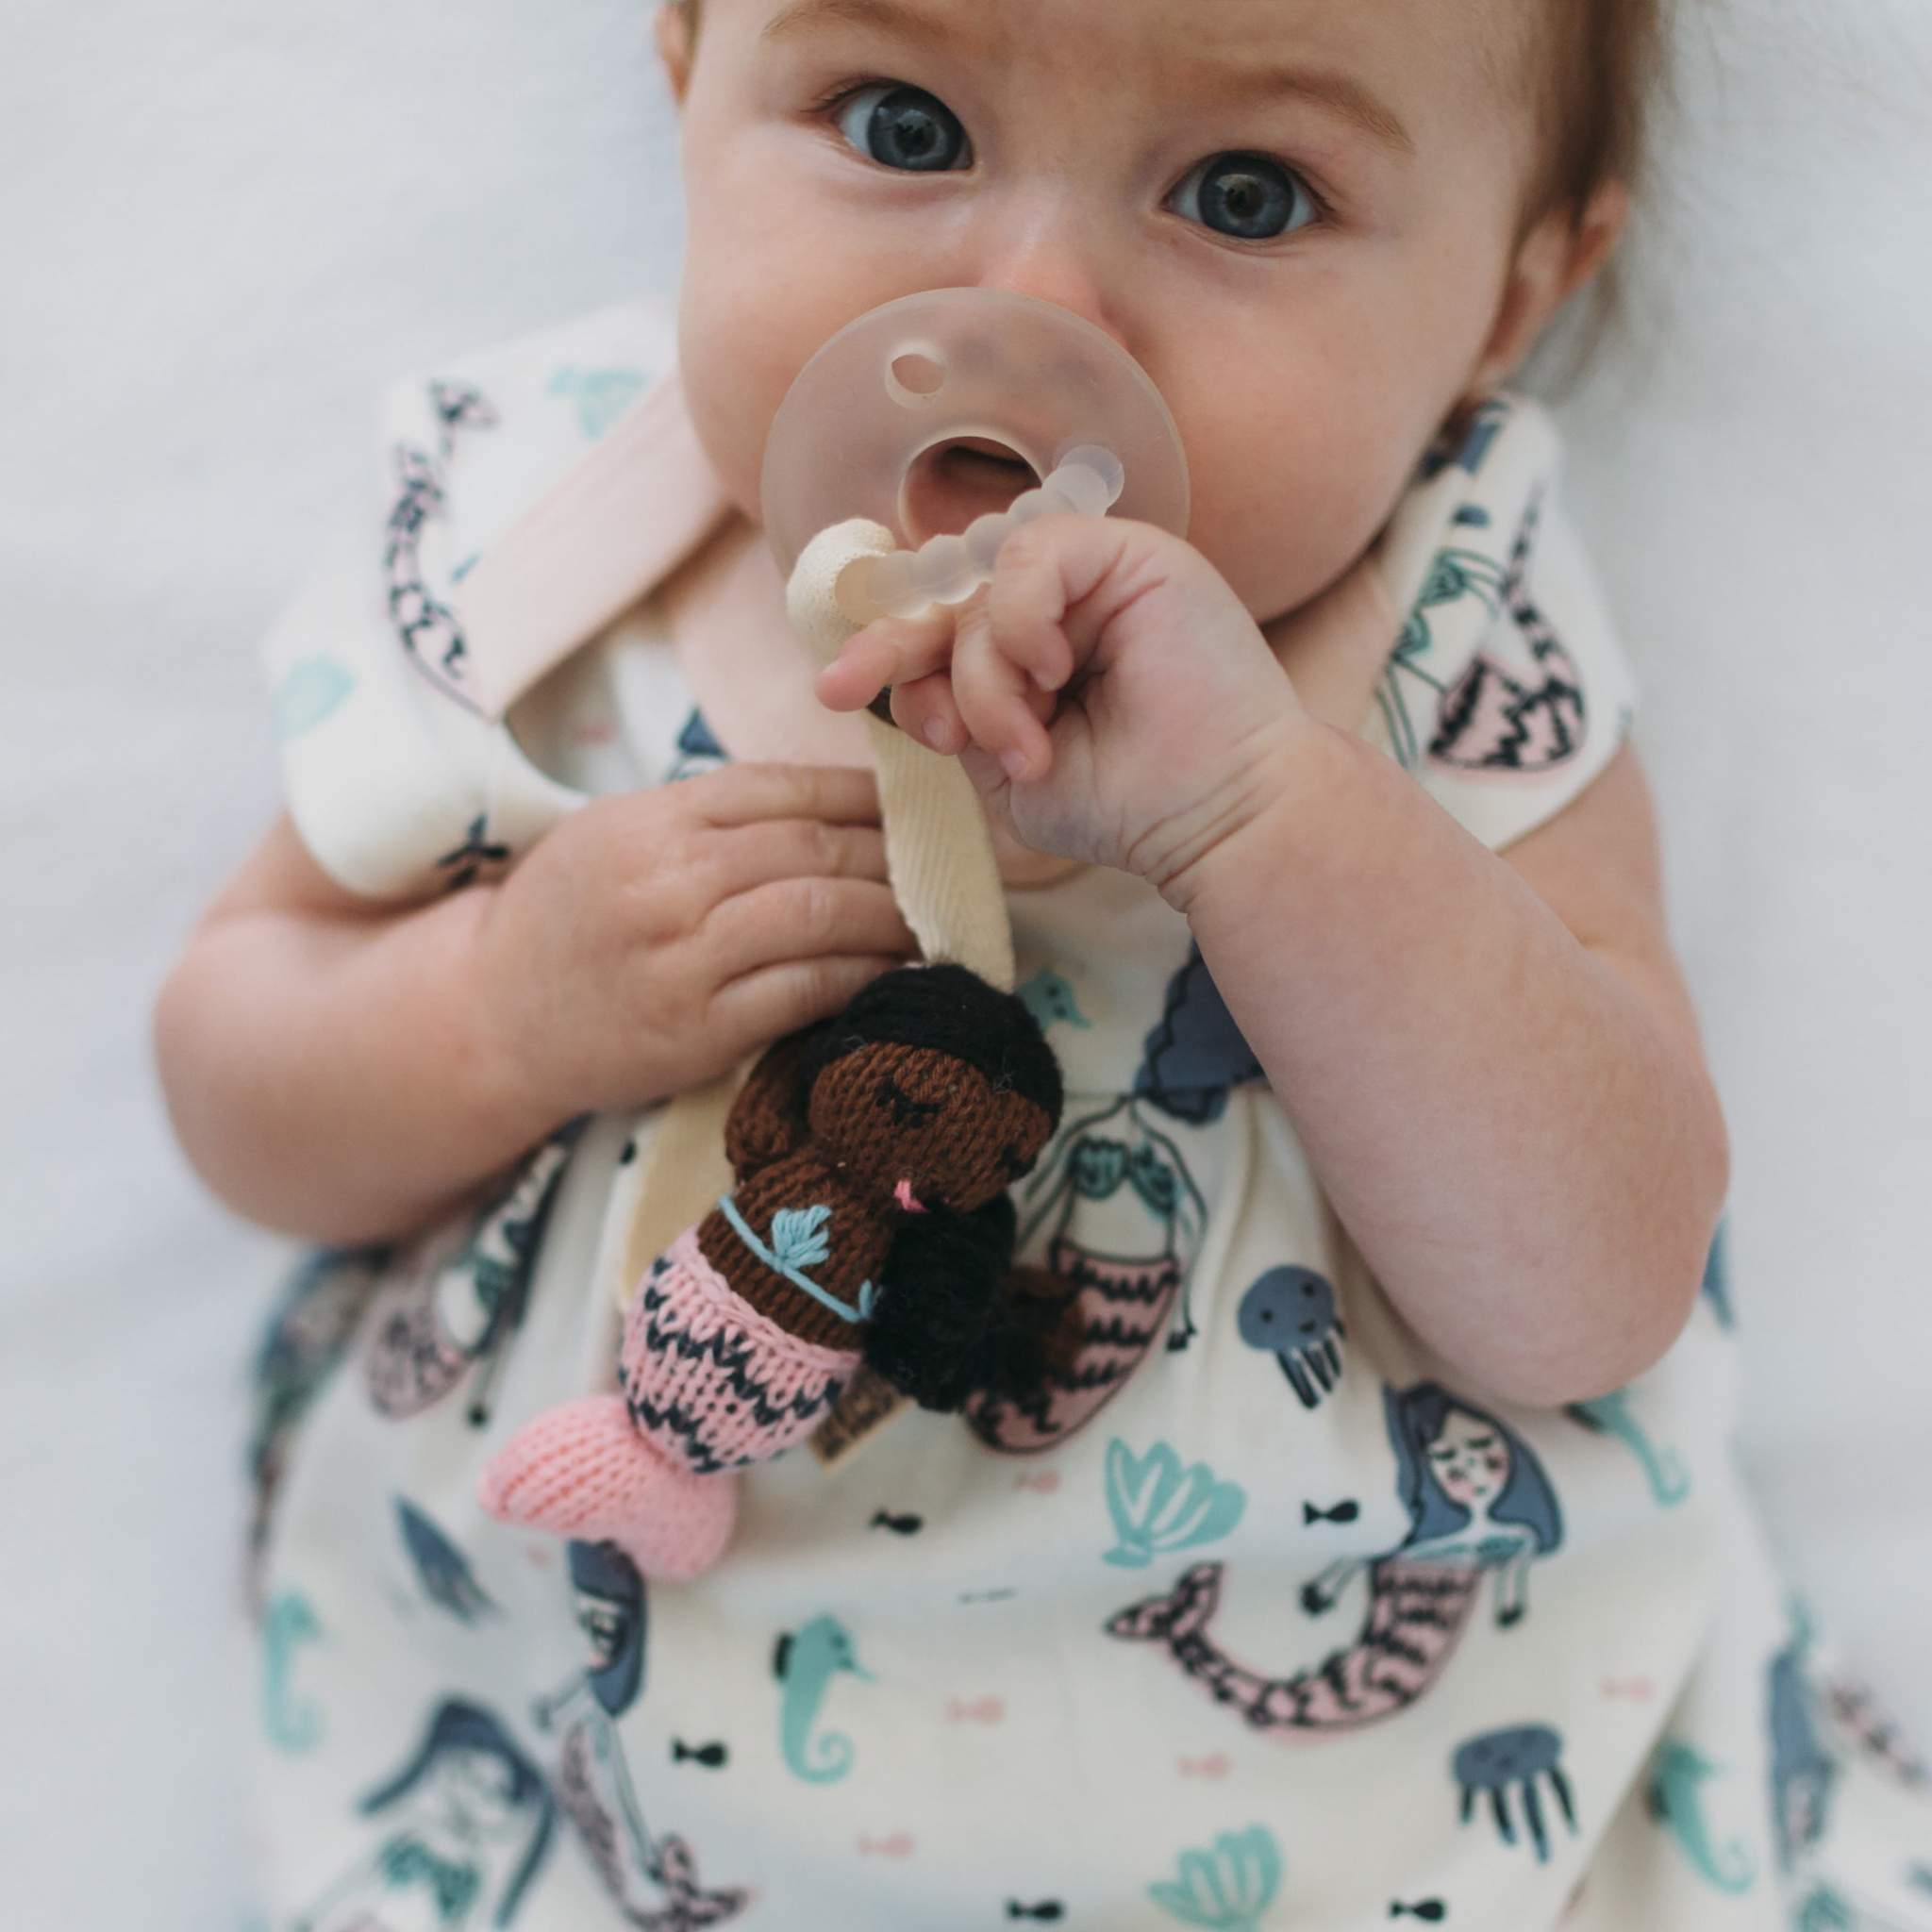 finn+emma mermaids collection, sustainabe baby clothes and gear